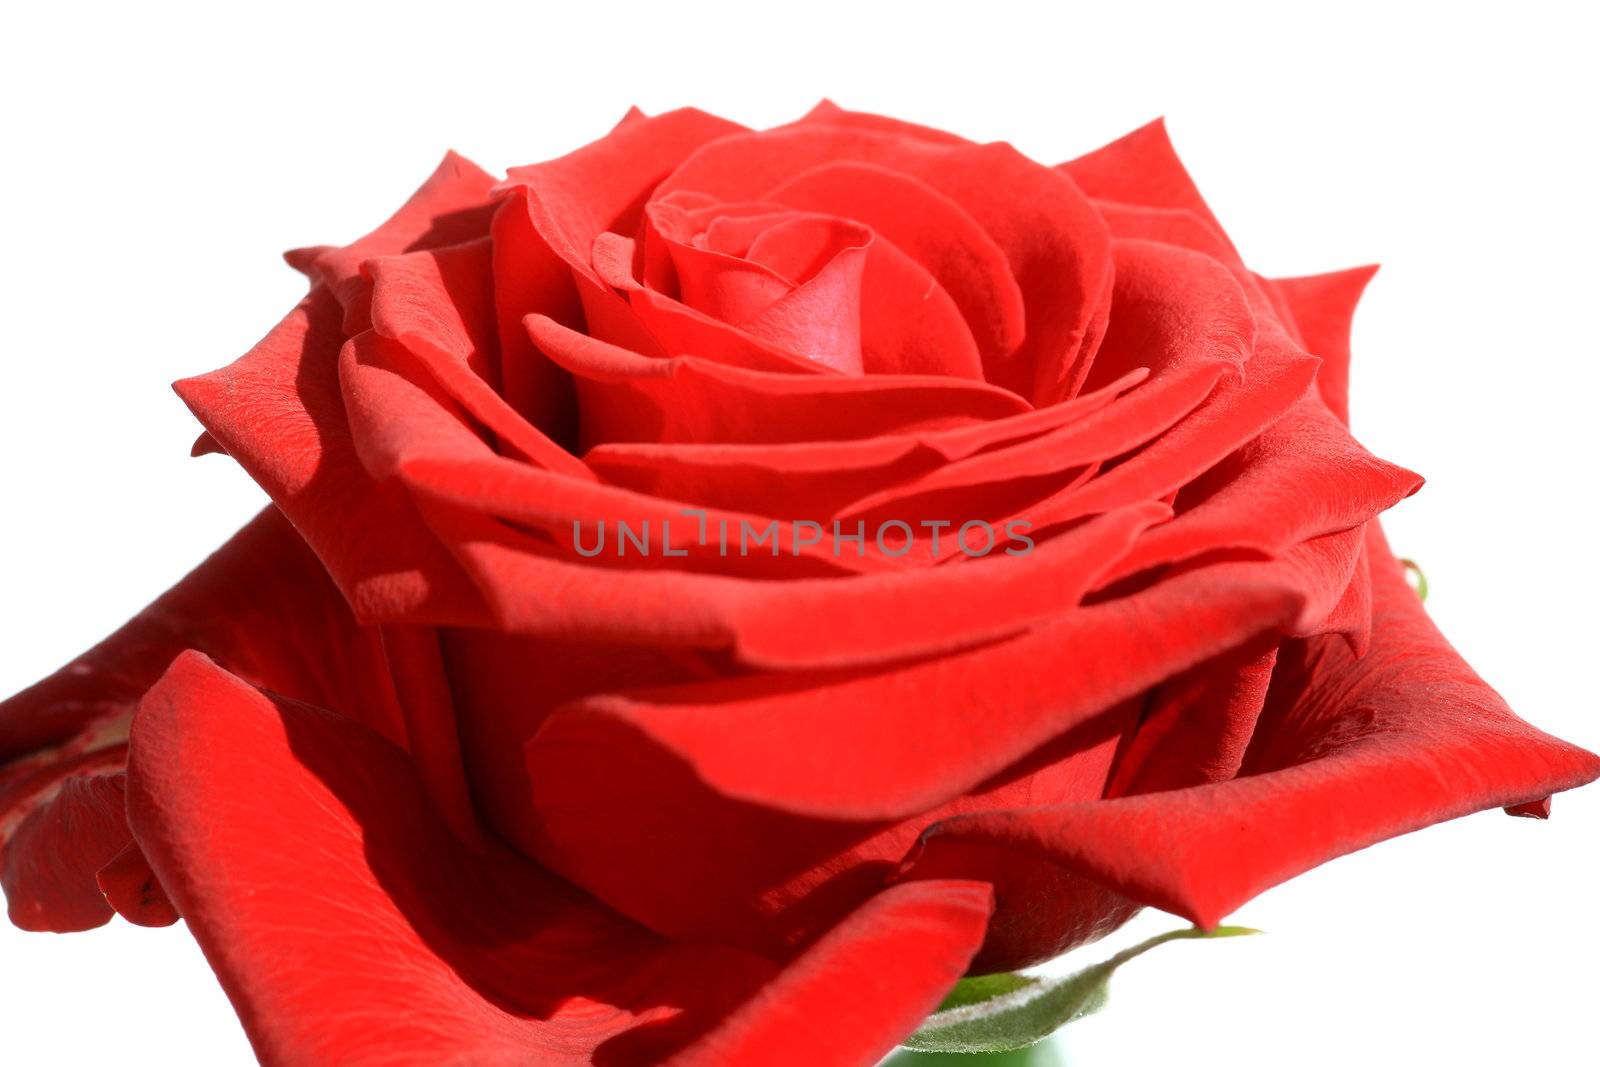 Close view of a beautiful red rose on a white background